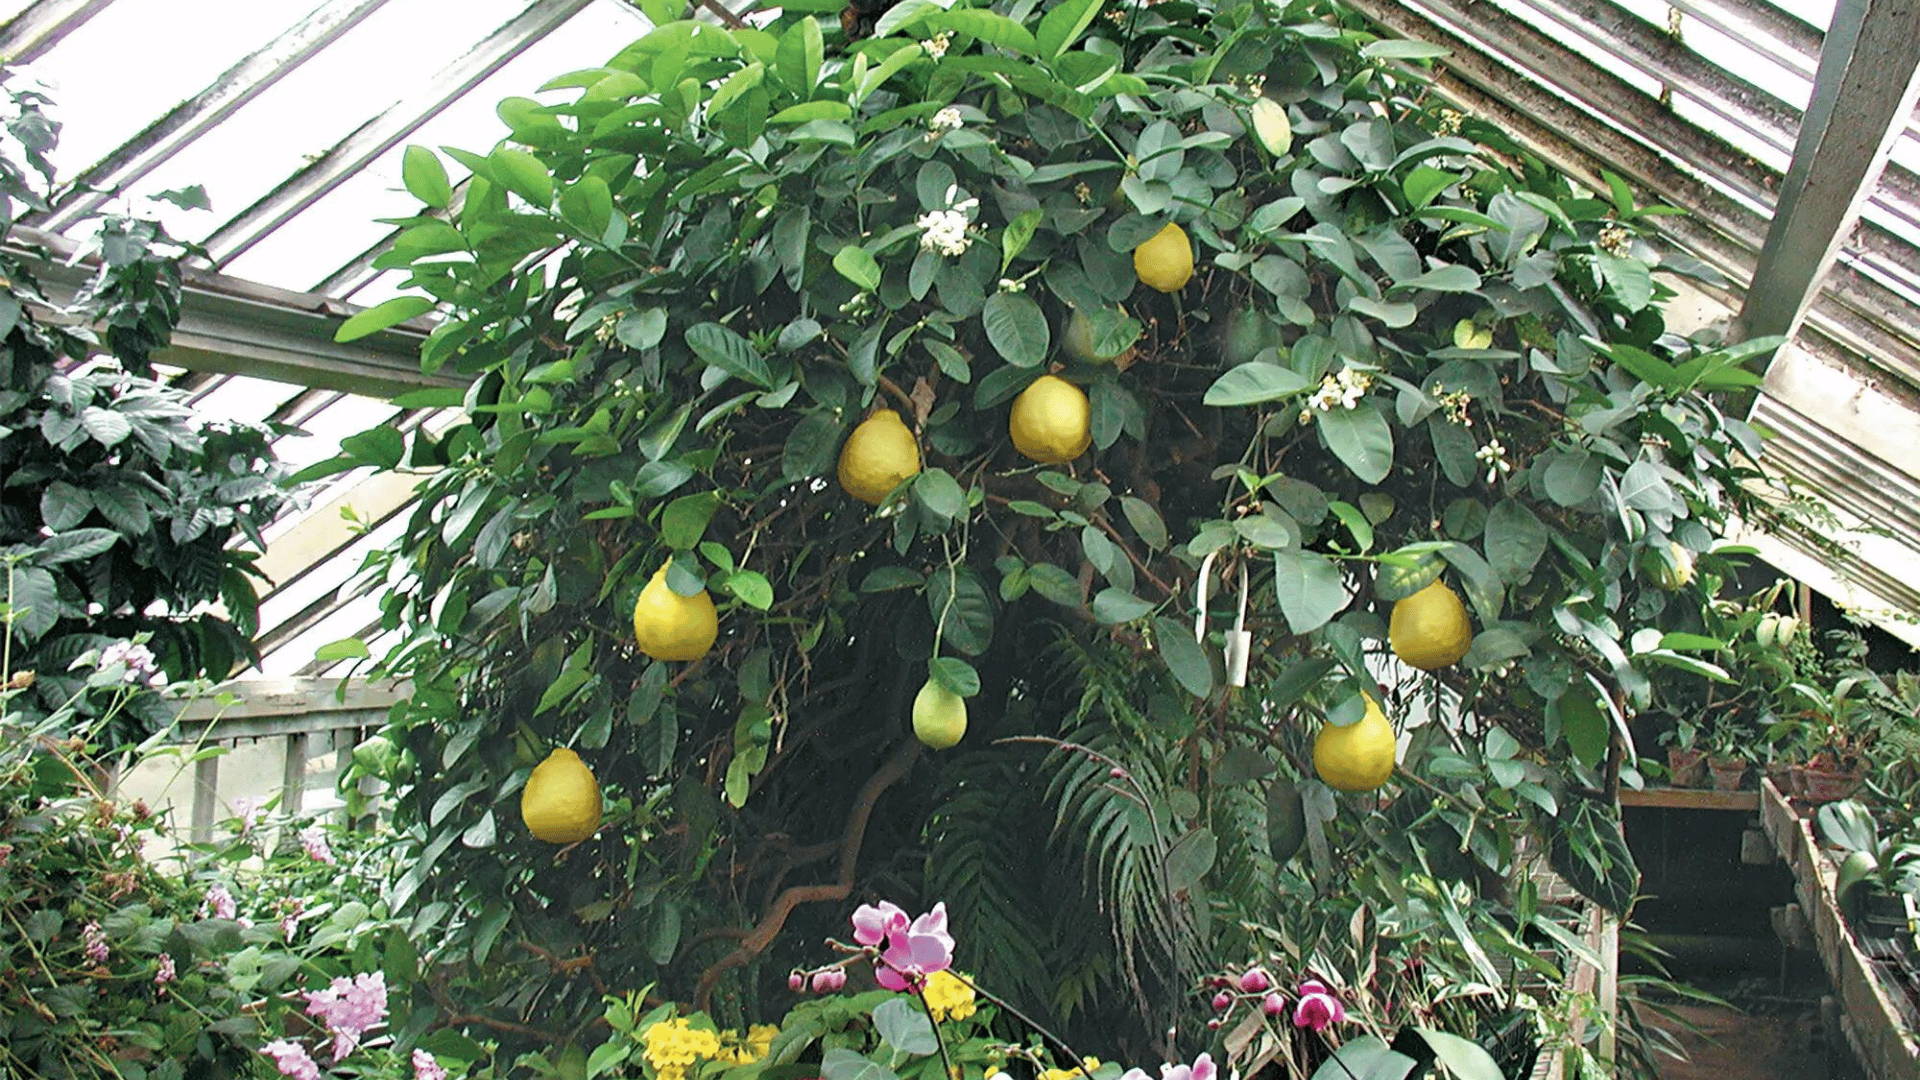 A Ponderosa lemon tree planted almost 125 years ago by the founder of Logee’s nursery, in Danielson, Conn., is pruned to fit into a Victorian-era greenhouse.Credit...Logee’s Greenhouses